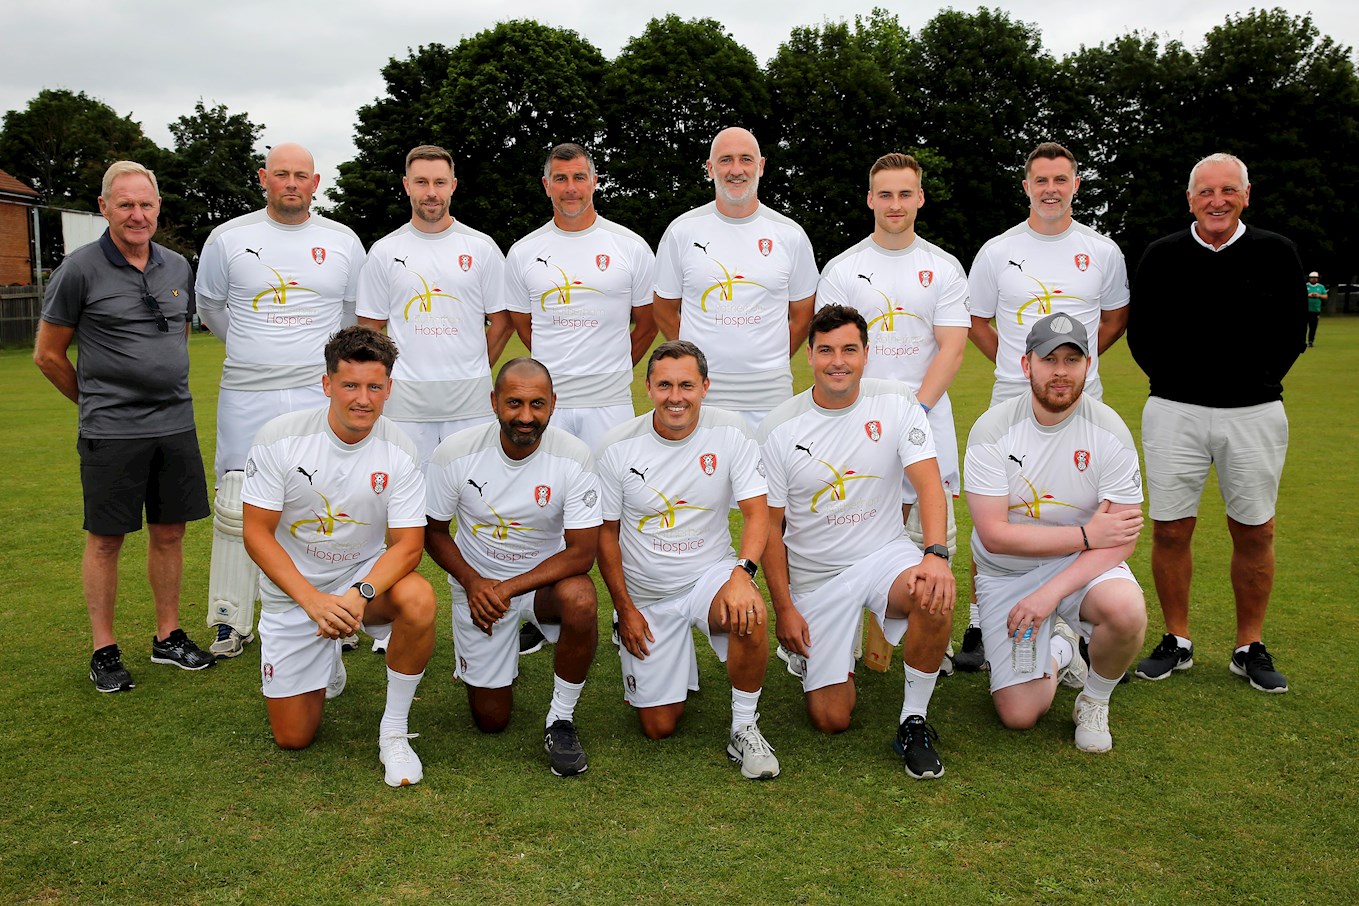 Roth Hospice Cricket Match - Wickersley v Millers all Stars - 009 - Millers all Stars.jpg